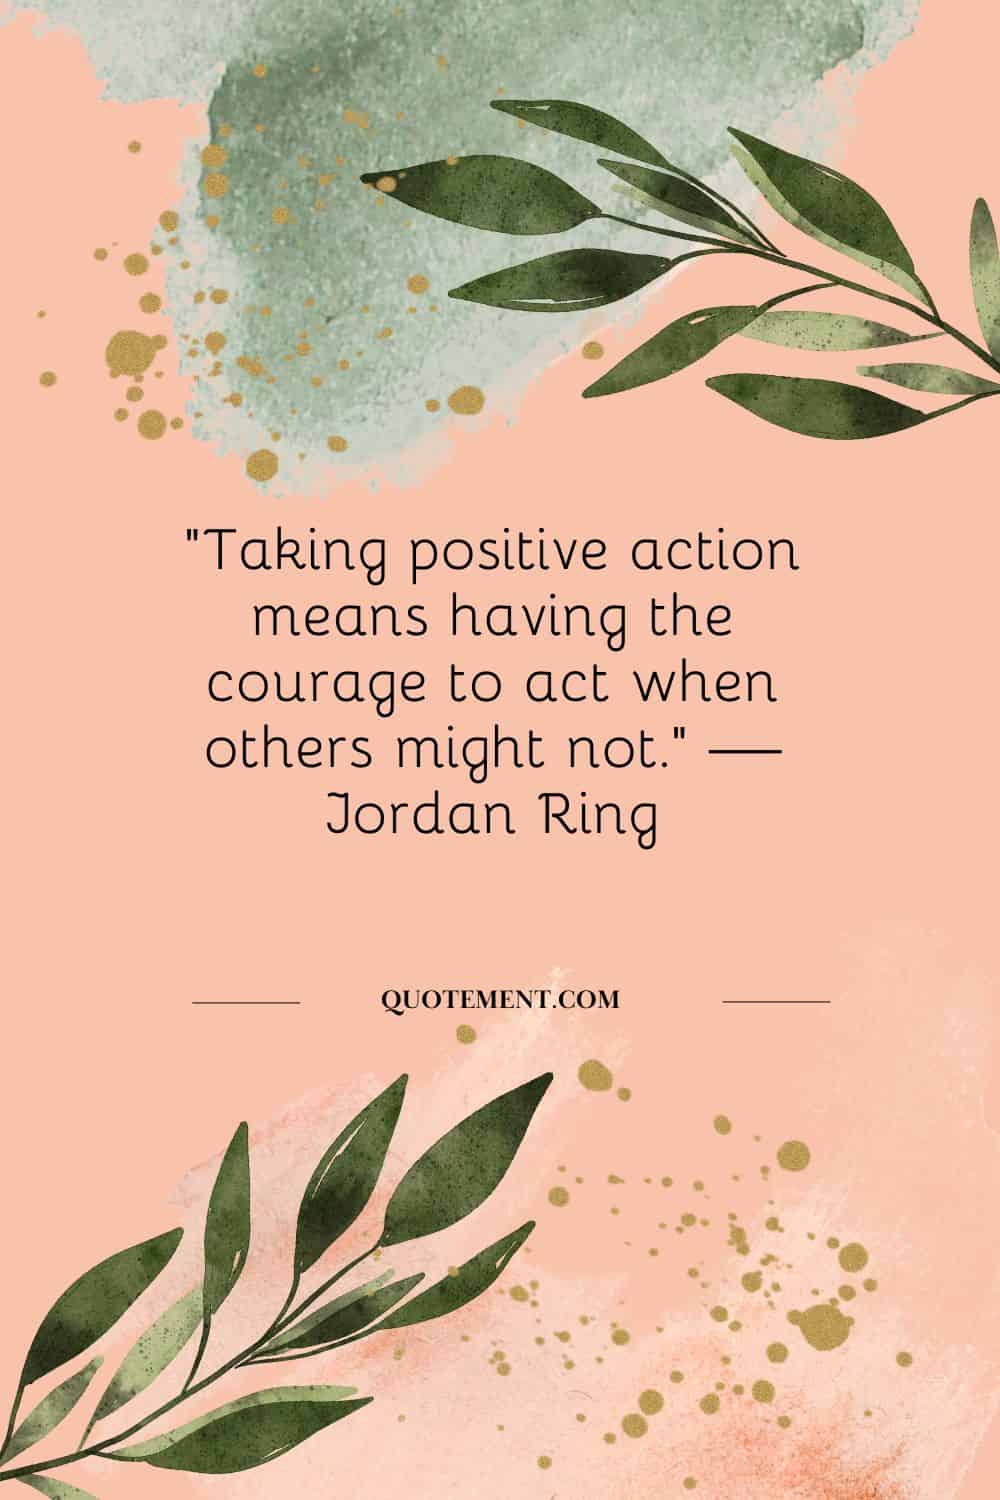 ”Taking positive action means having the courage to act when others might not.” — Jordan Ring